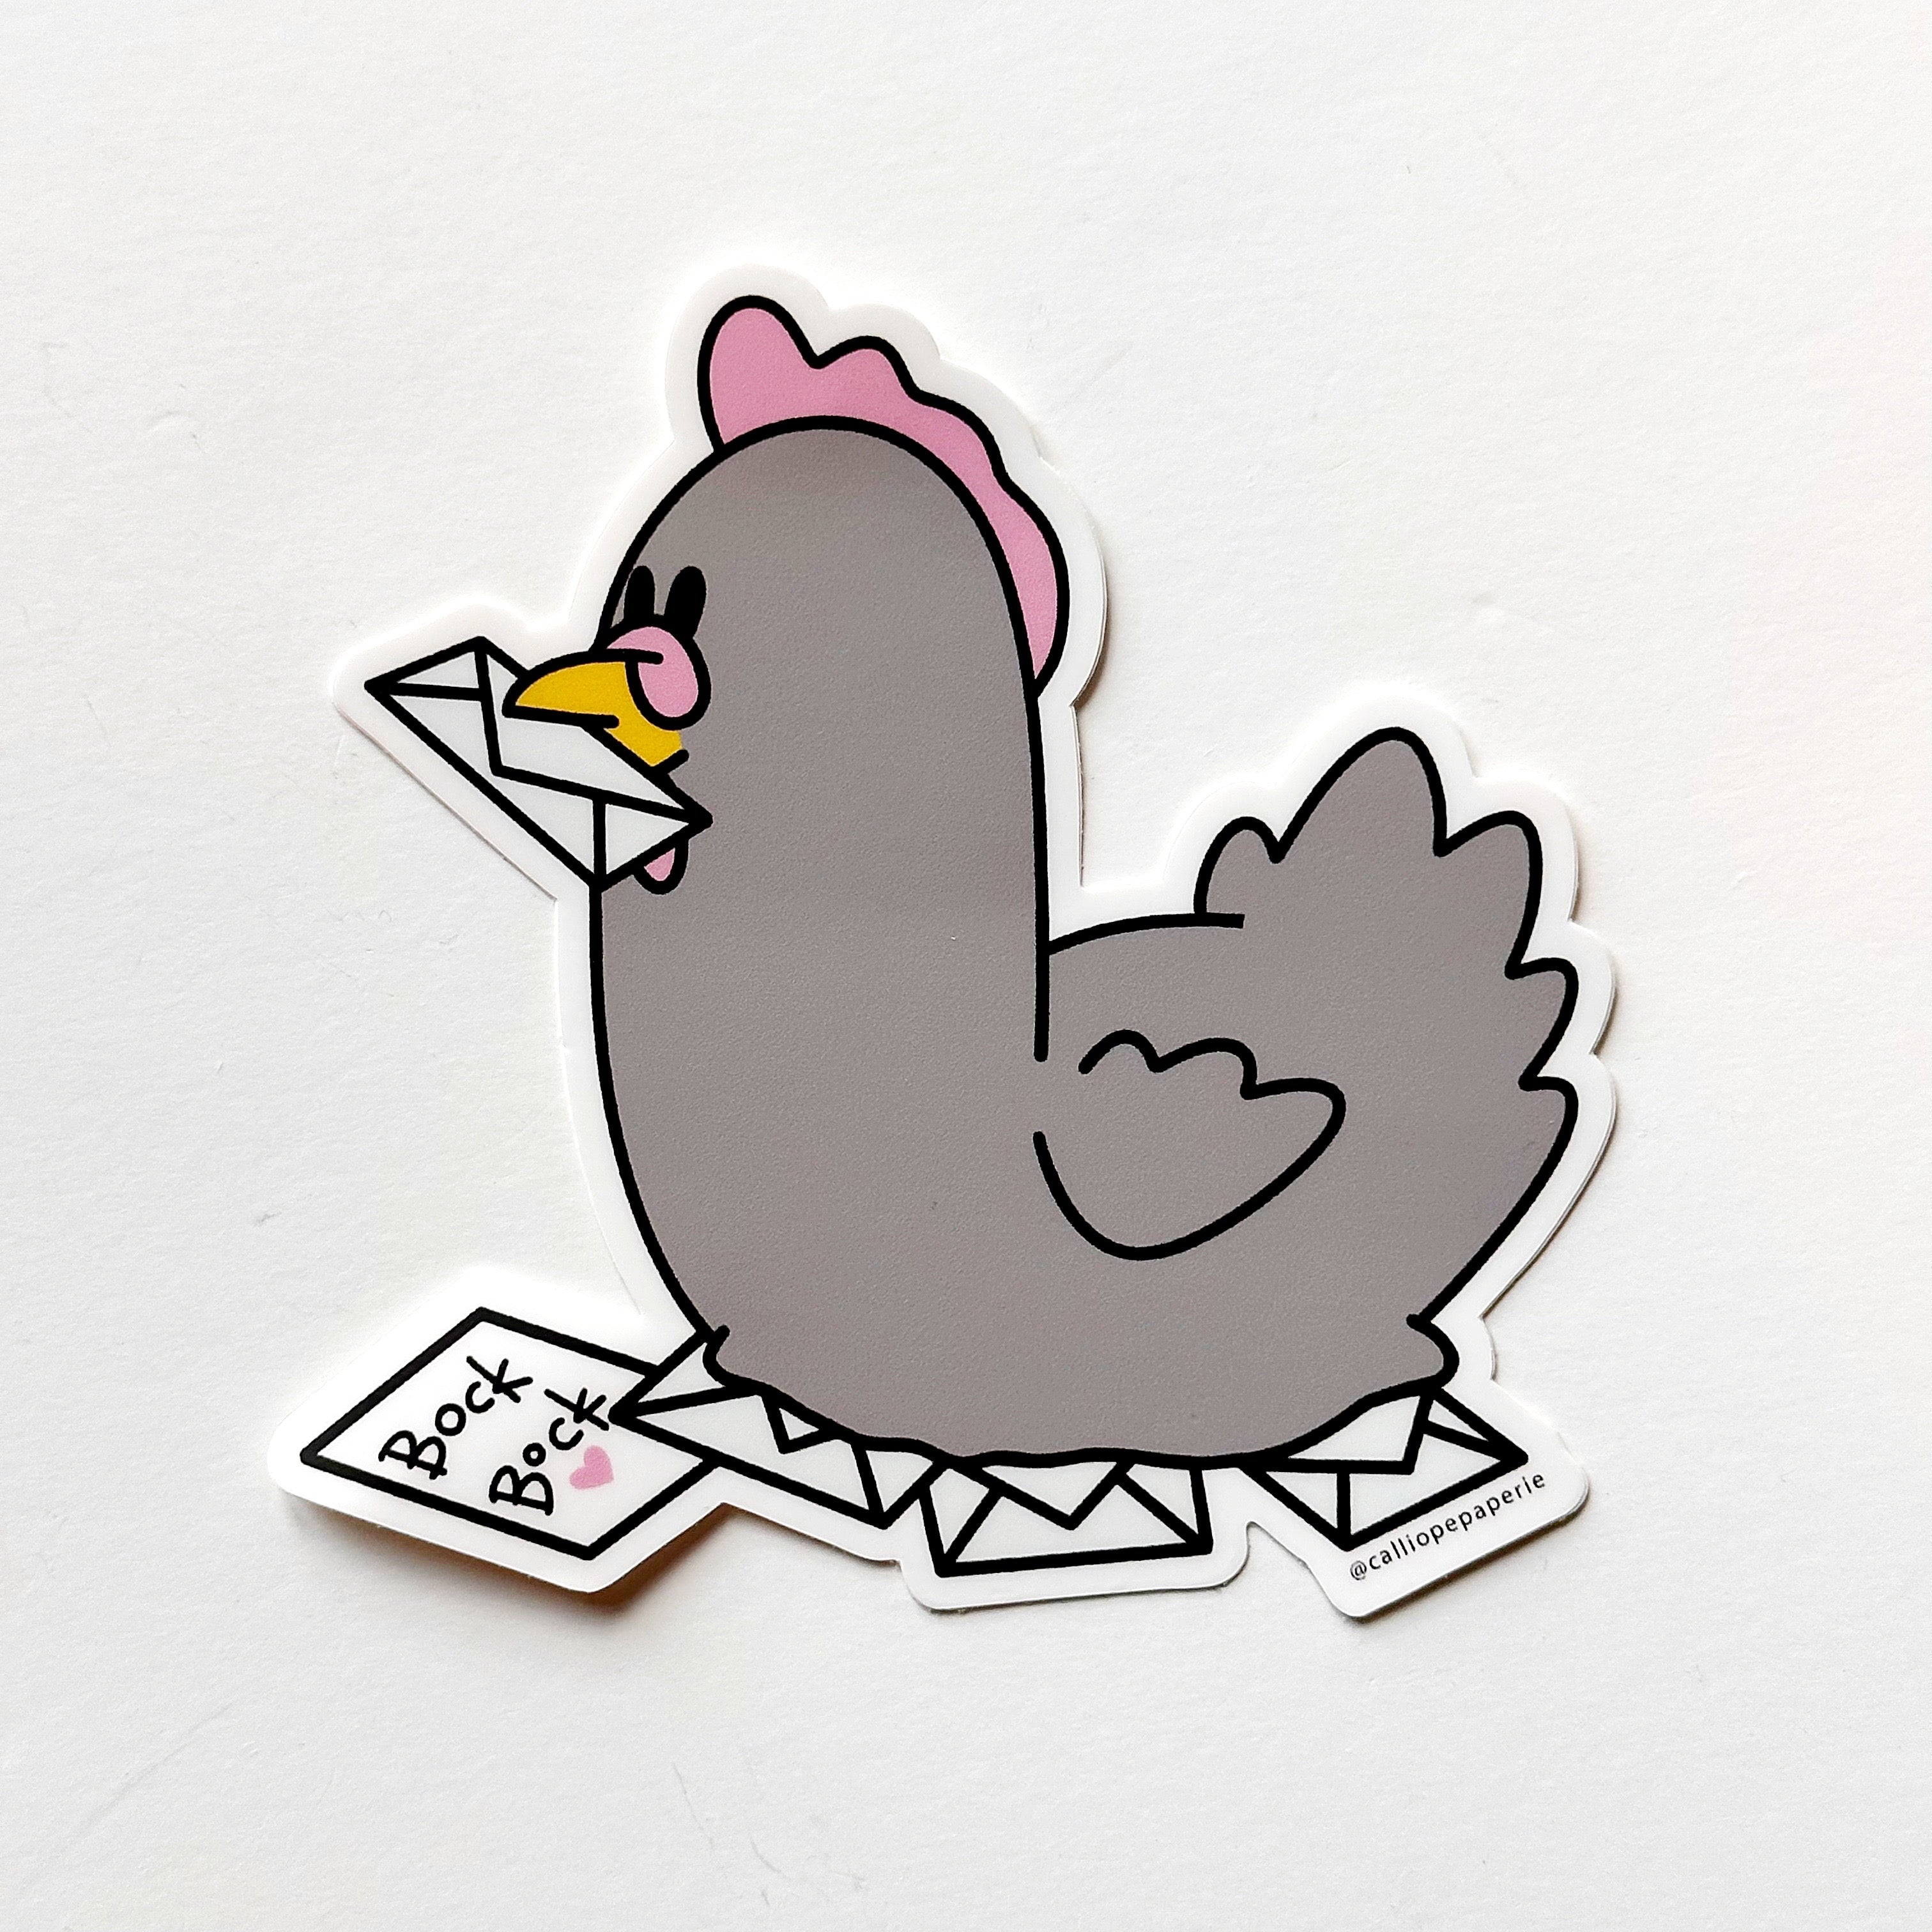 Image of sticker of a grey chicken with pink crest and holding a white envelope in its yellow beak and sitting on a nest of envelopes with one saying"Bock Bock" in black text.  